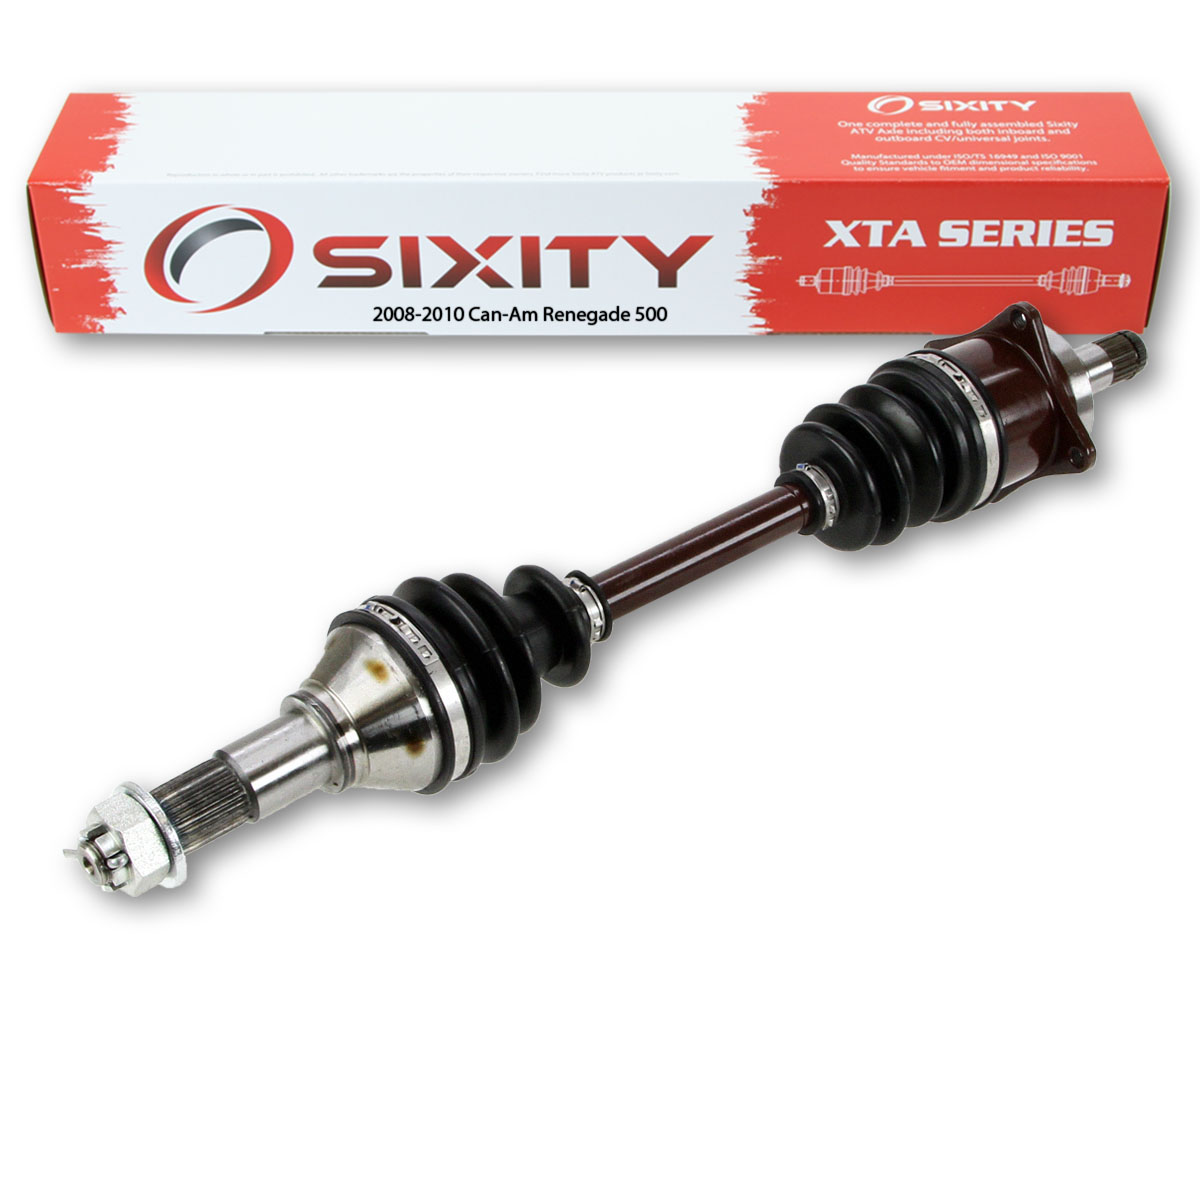 Sixity 2010 Can-Am Renegade 500 4X4 Front Left XTA ATV Axle